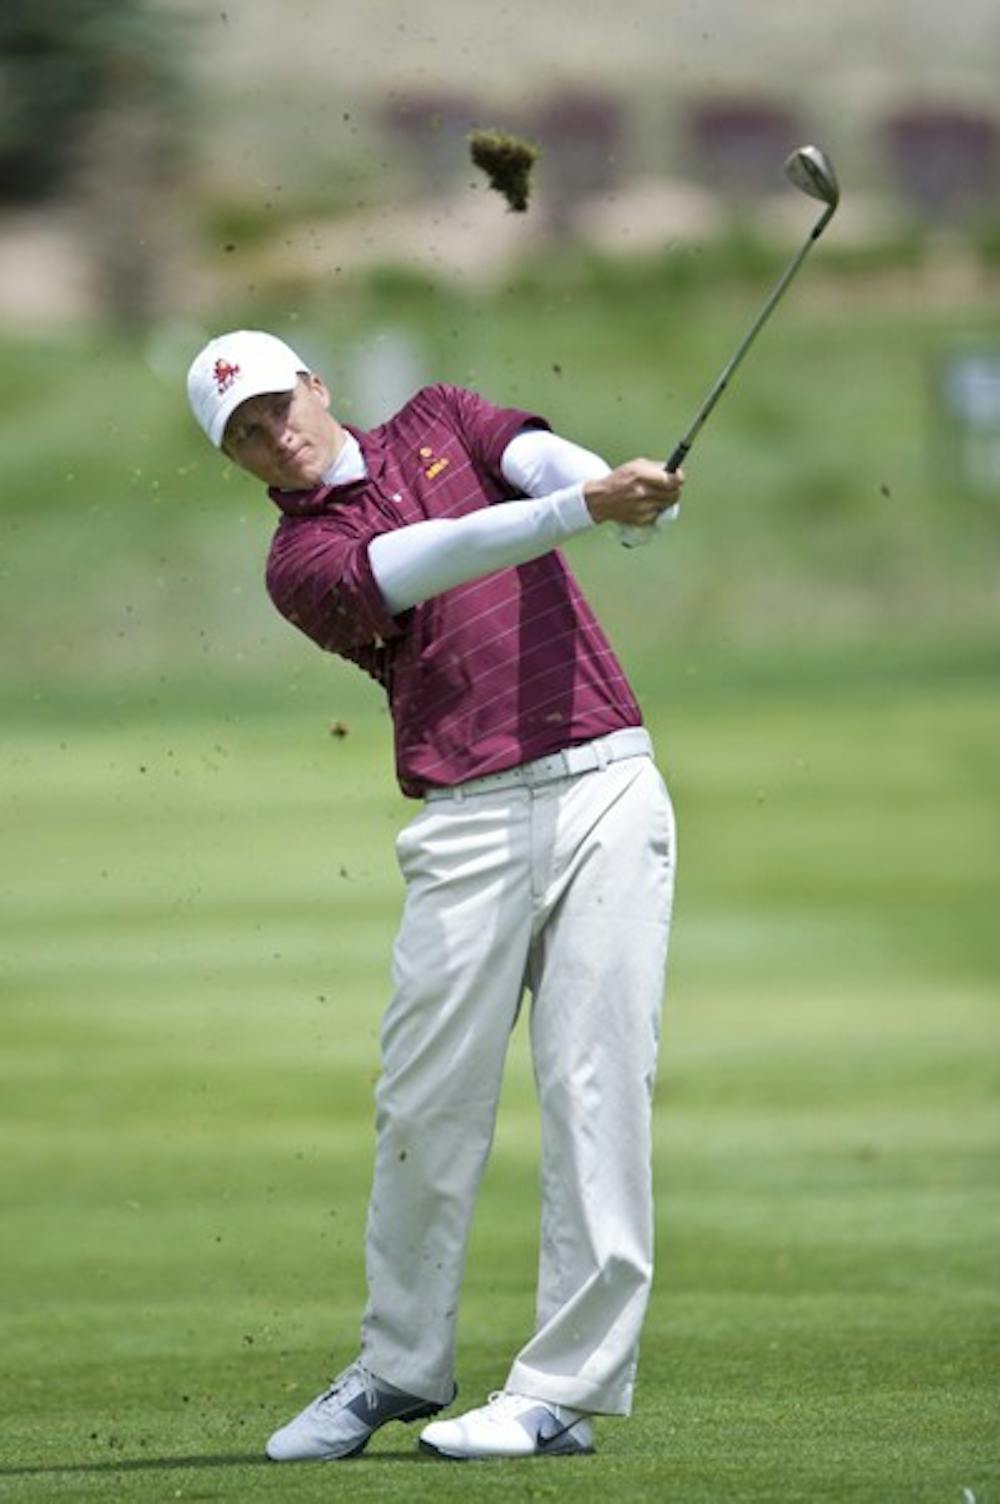 Open experience: Scott Pinckney makes an approach shot as an ASU player earlier in the season. The ASU graduate played in the US open, missing the cut despite two solid rounds of golf.  (Photo courtesy of Joel Broida)